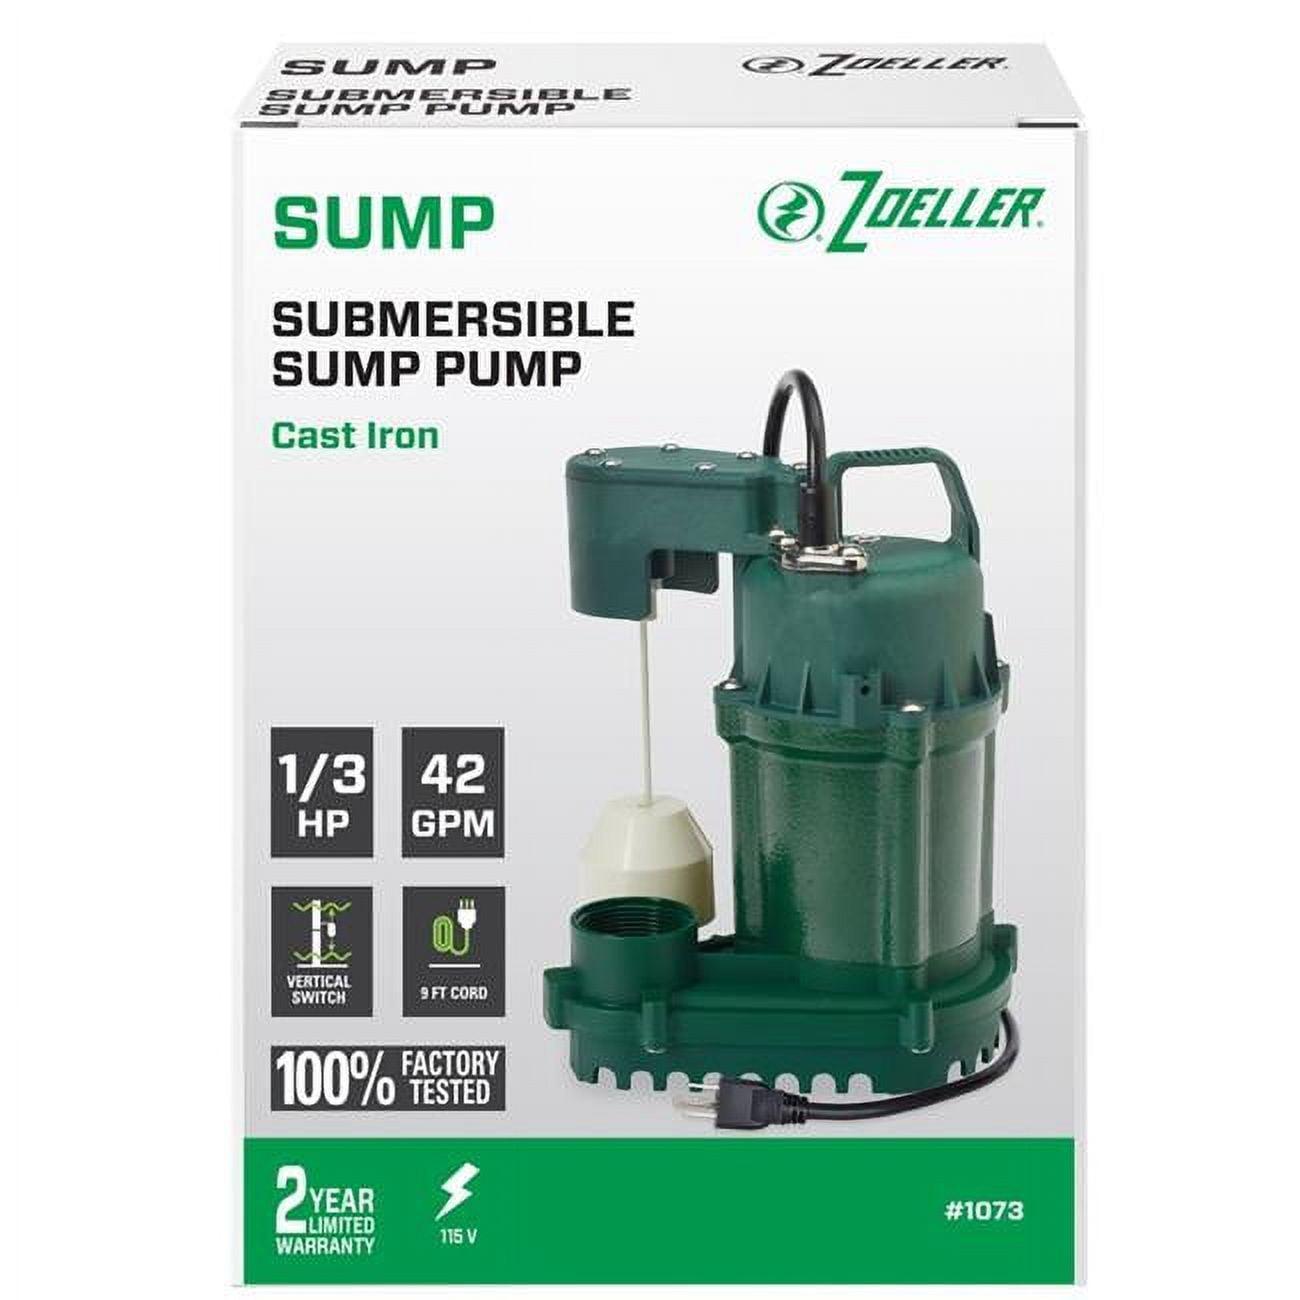 Rugged Cast Iron 1/3 HP Submersible Sump Pump with Vortex Impeller